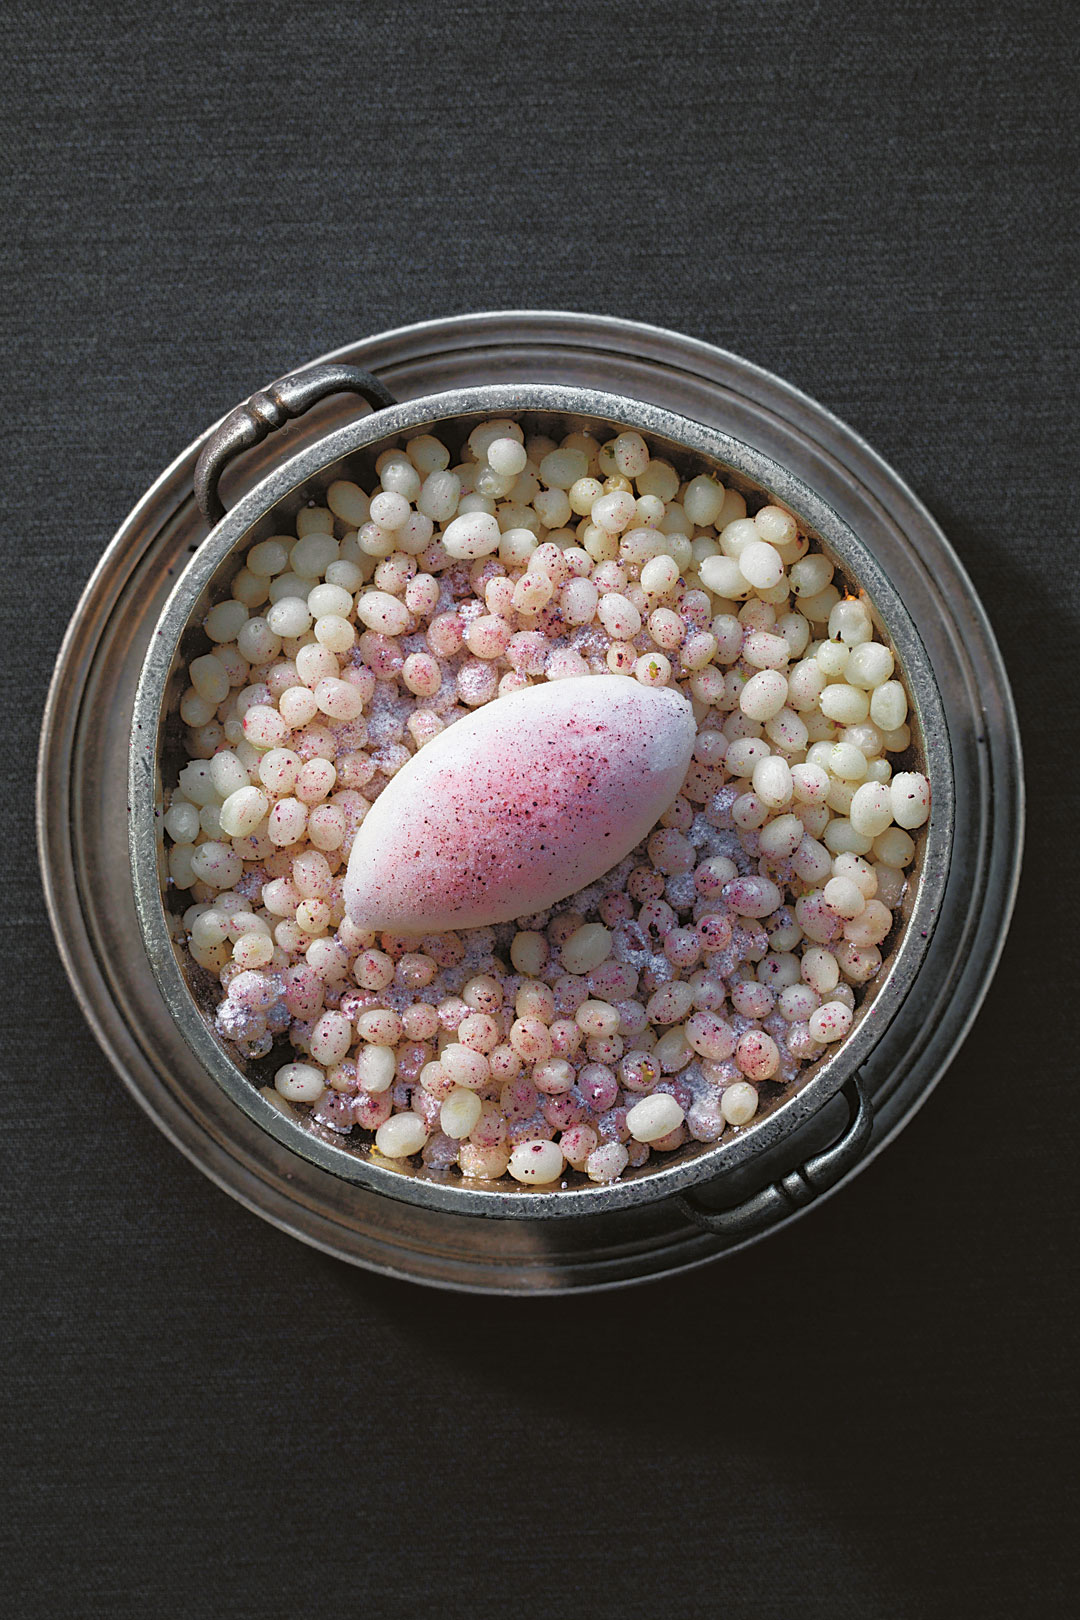 Snowberries, Snowberry Sherbet and Blueberry Powder. Photography: John Cullen 